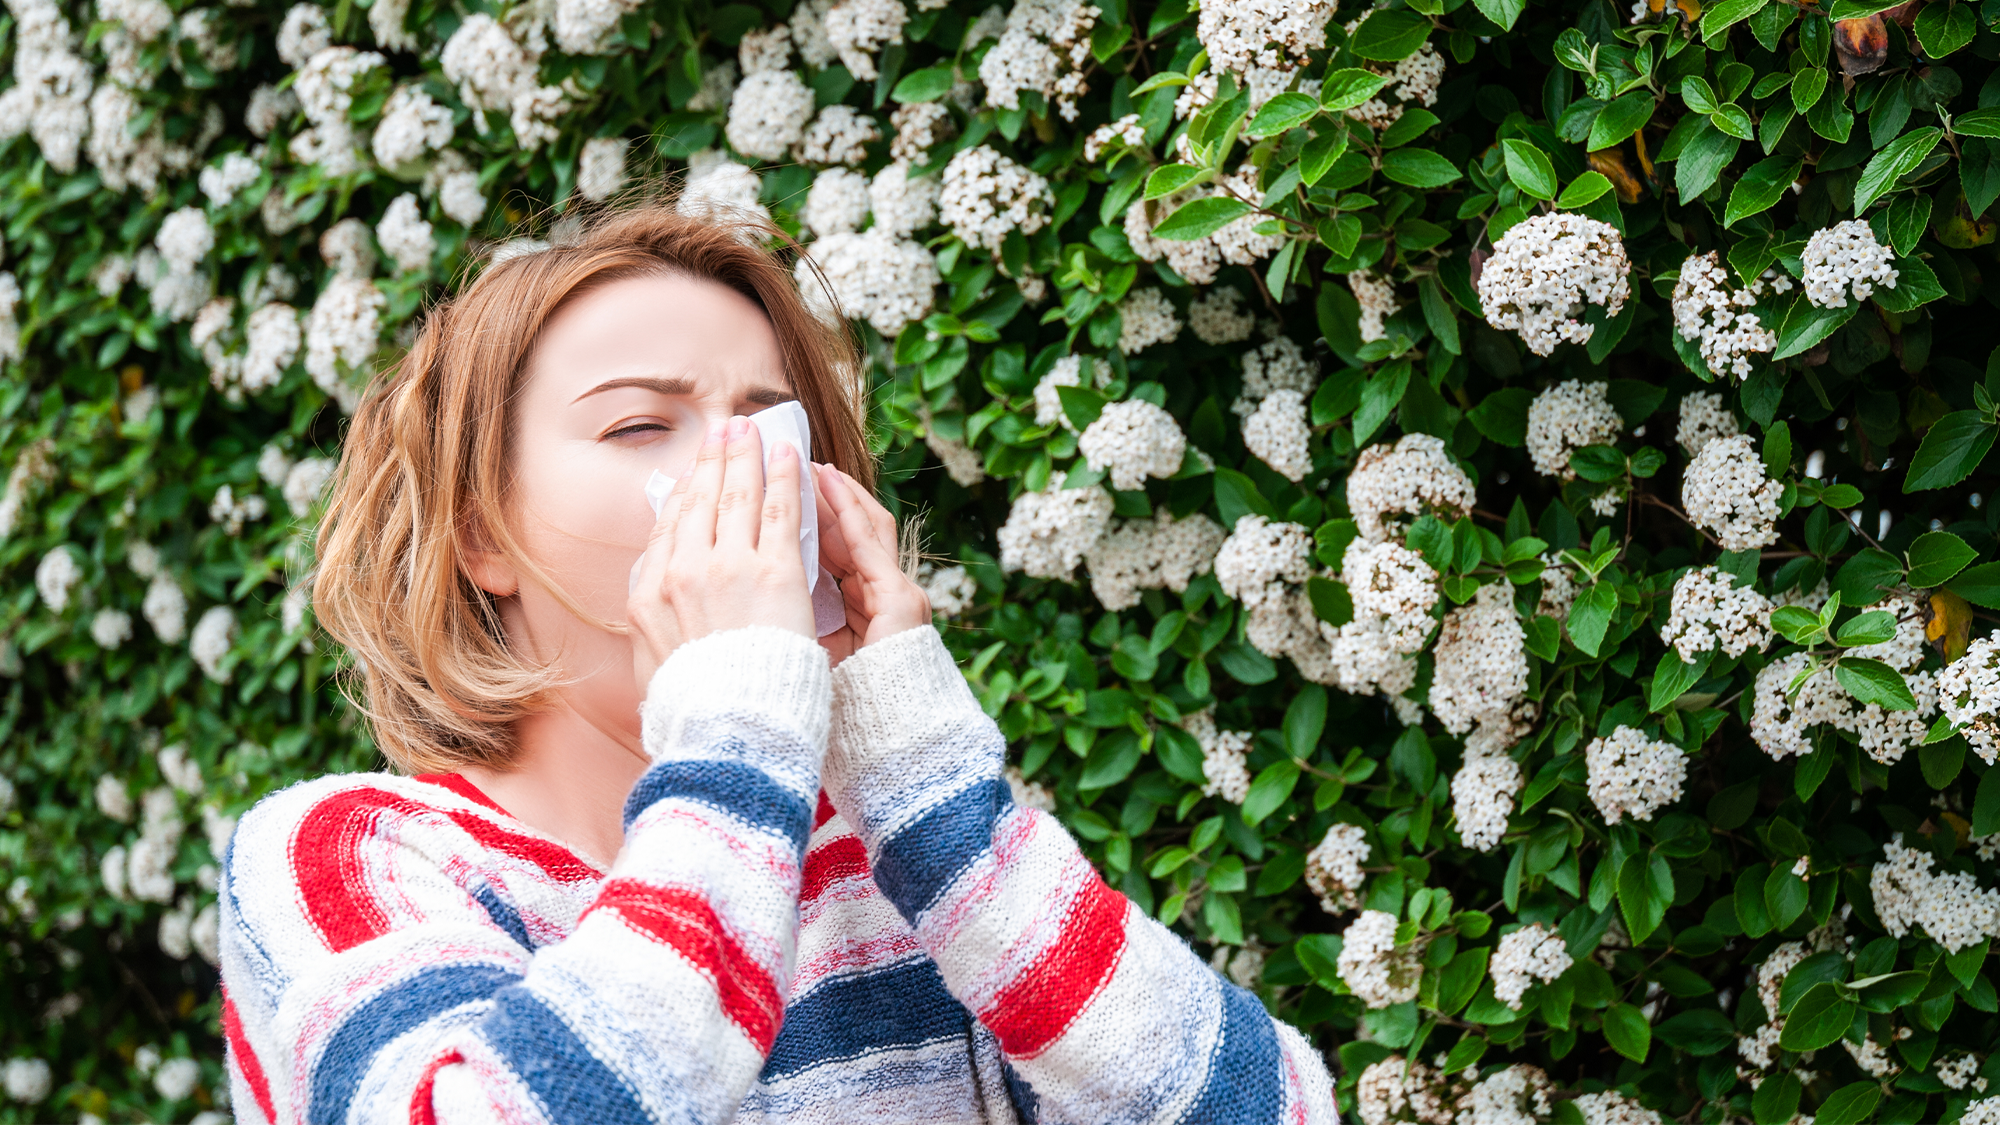 a women blows her nose into a facial tissue while standing next to blooming white flowers